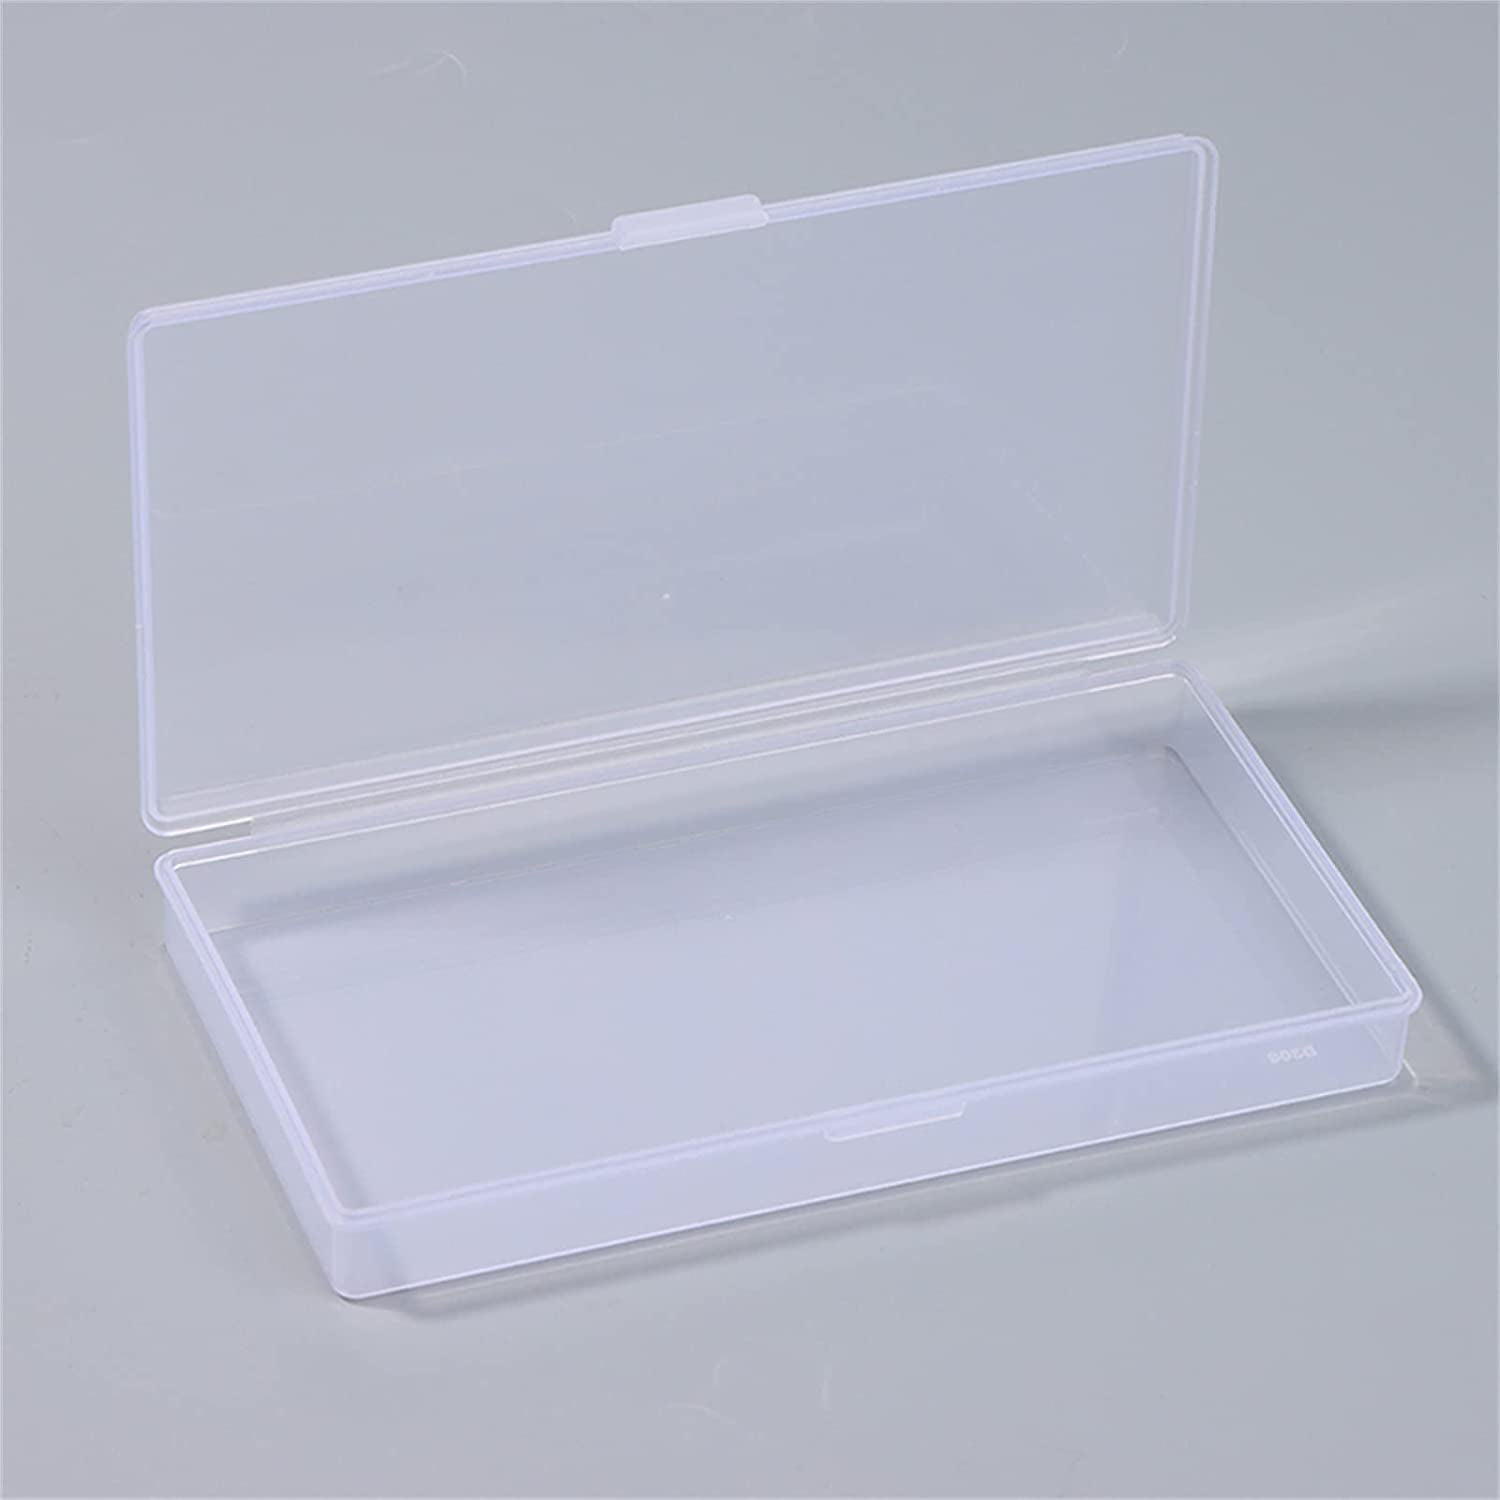 10PCS JEWEL CASE HARD CONTAINER BOX GIFT PACKAGE CUBE 